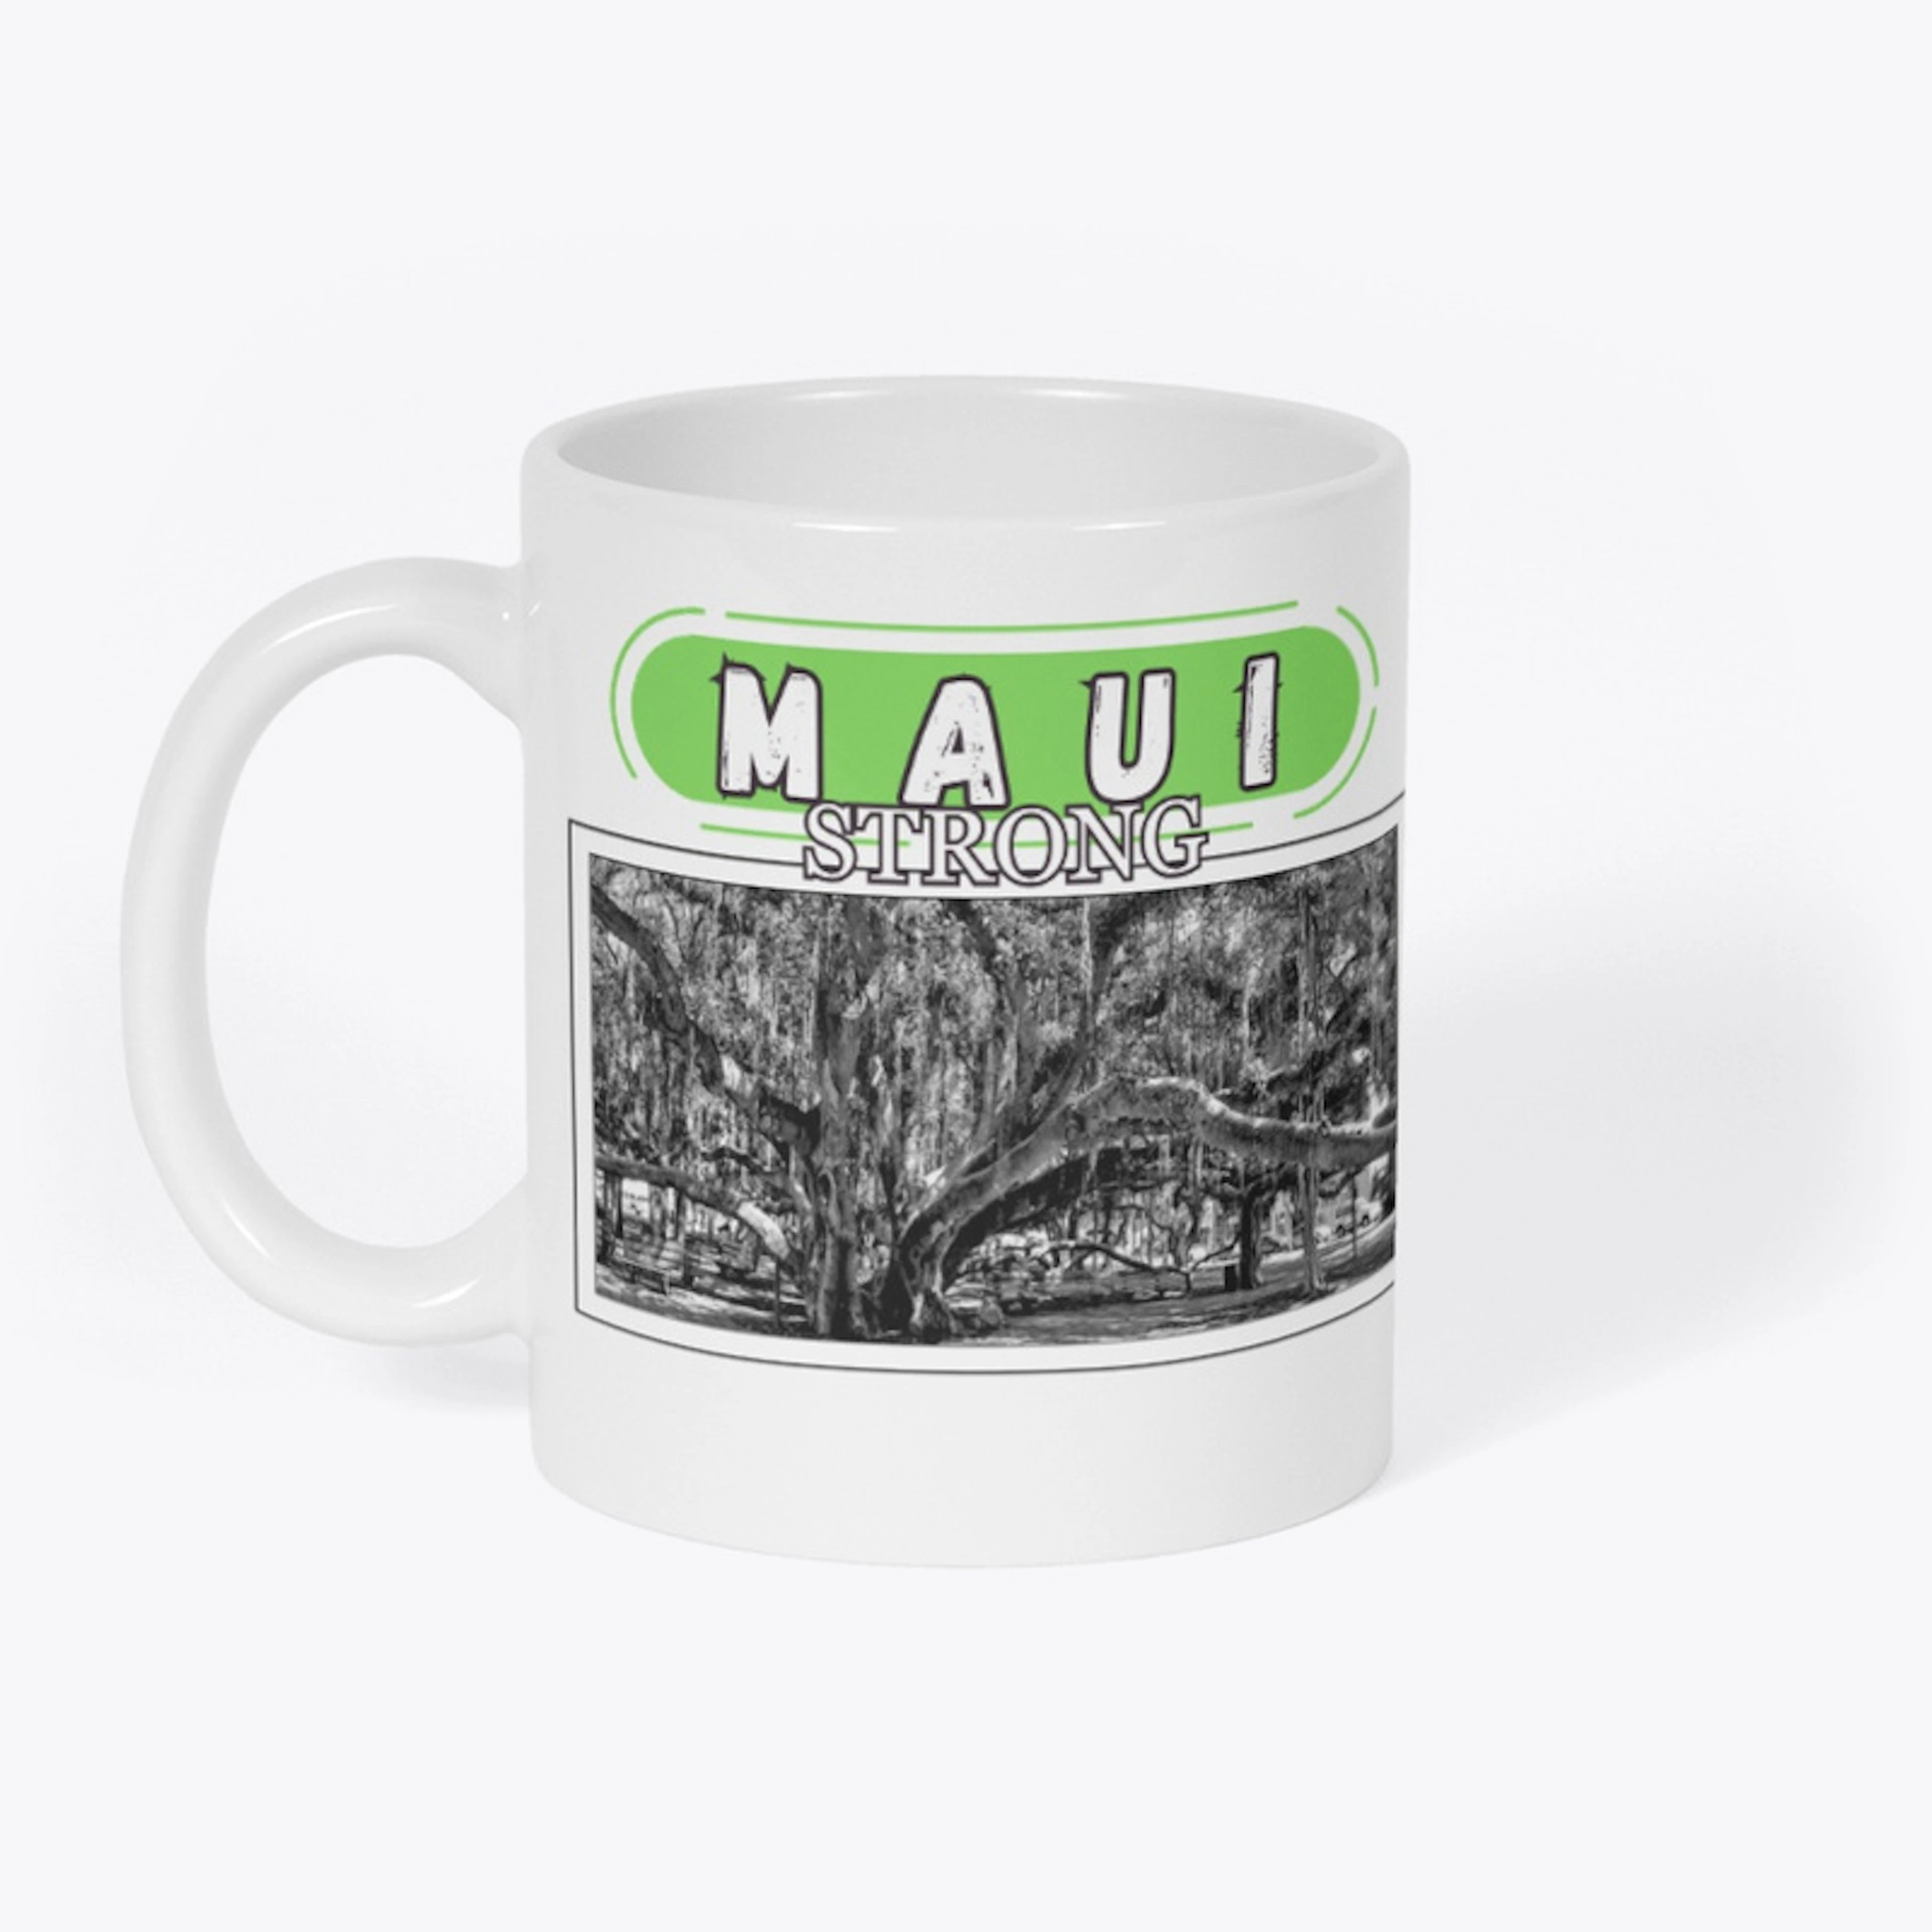 Maui Strong Apparel in Green